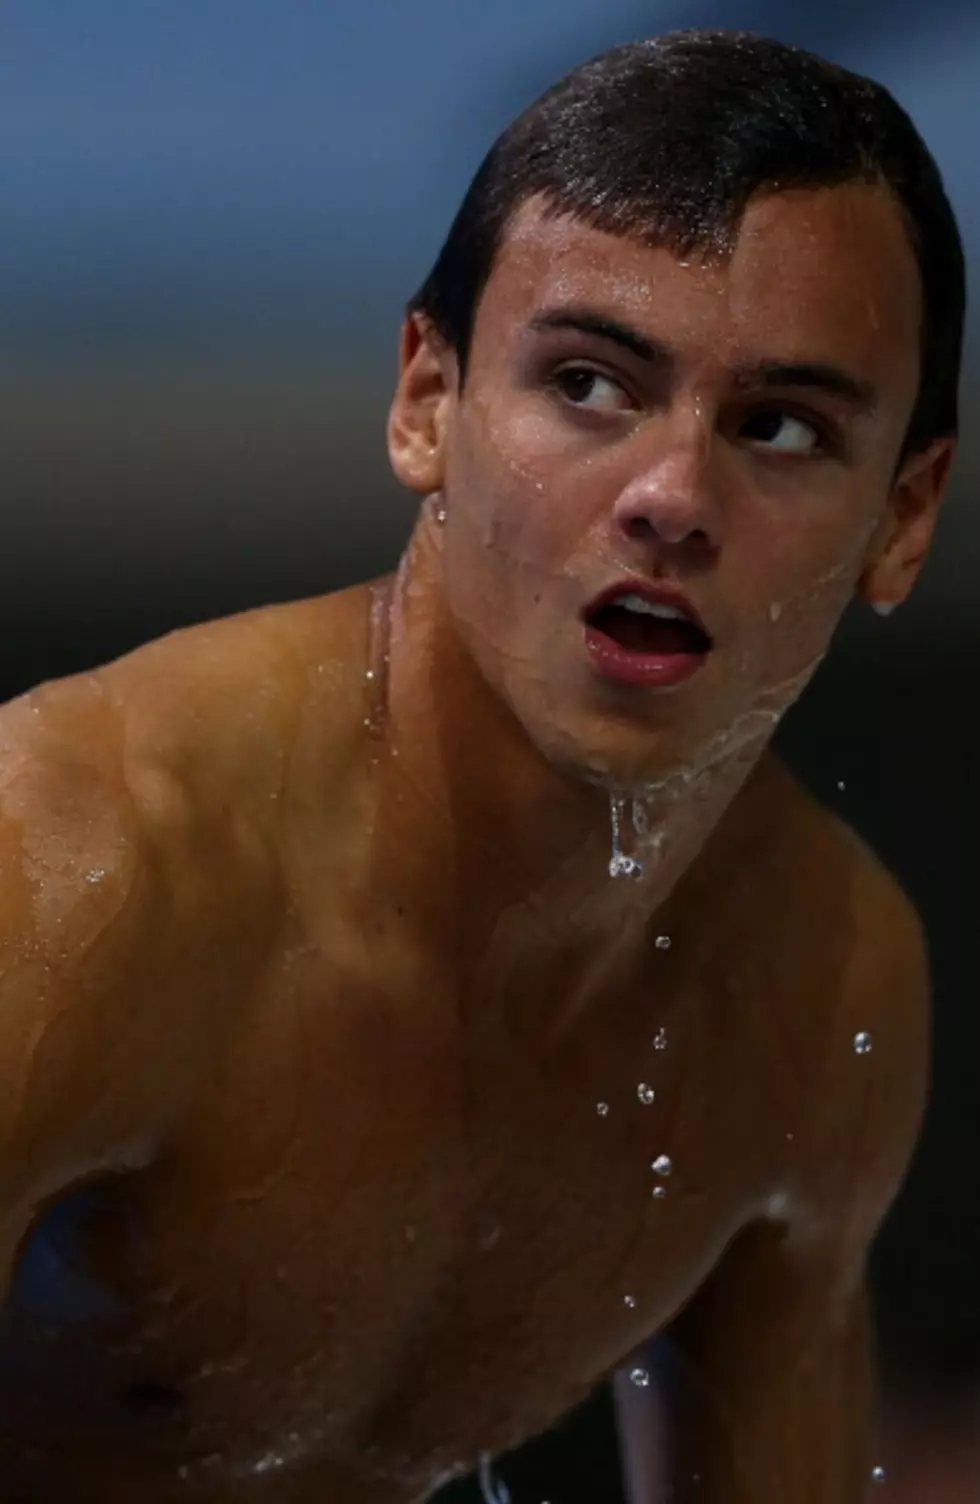 Does Olympian Tom Daley Resemble Your Idea of Christian Grey?